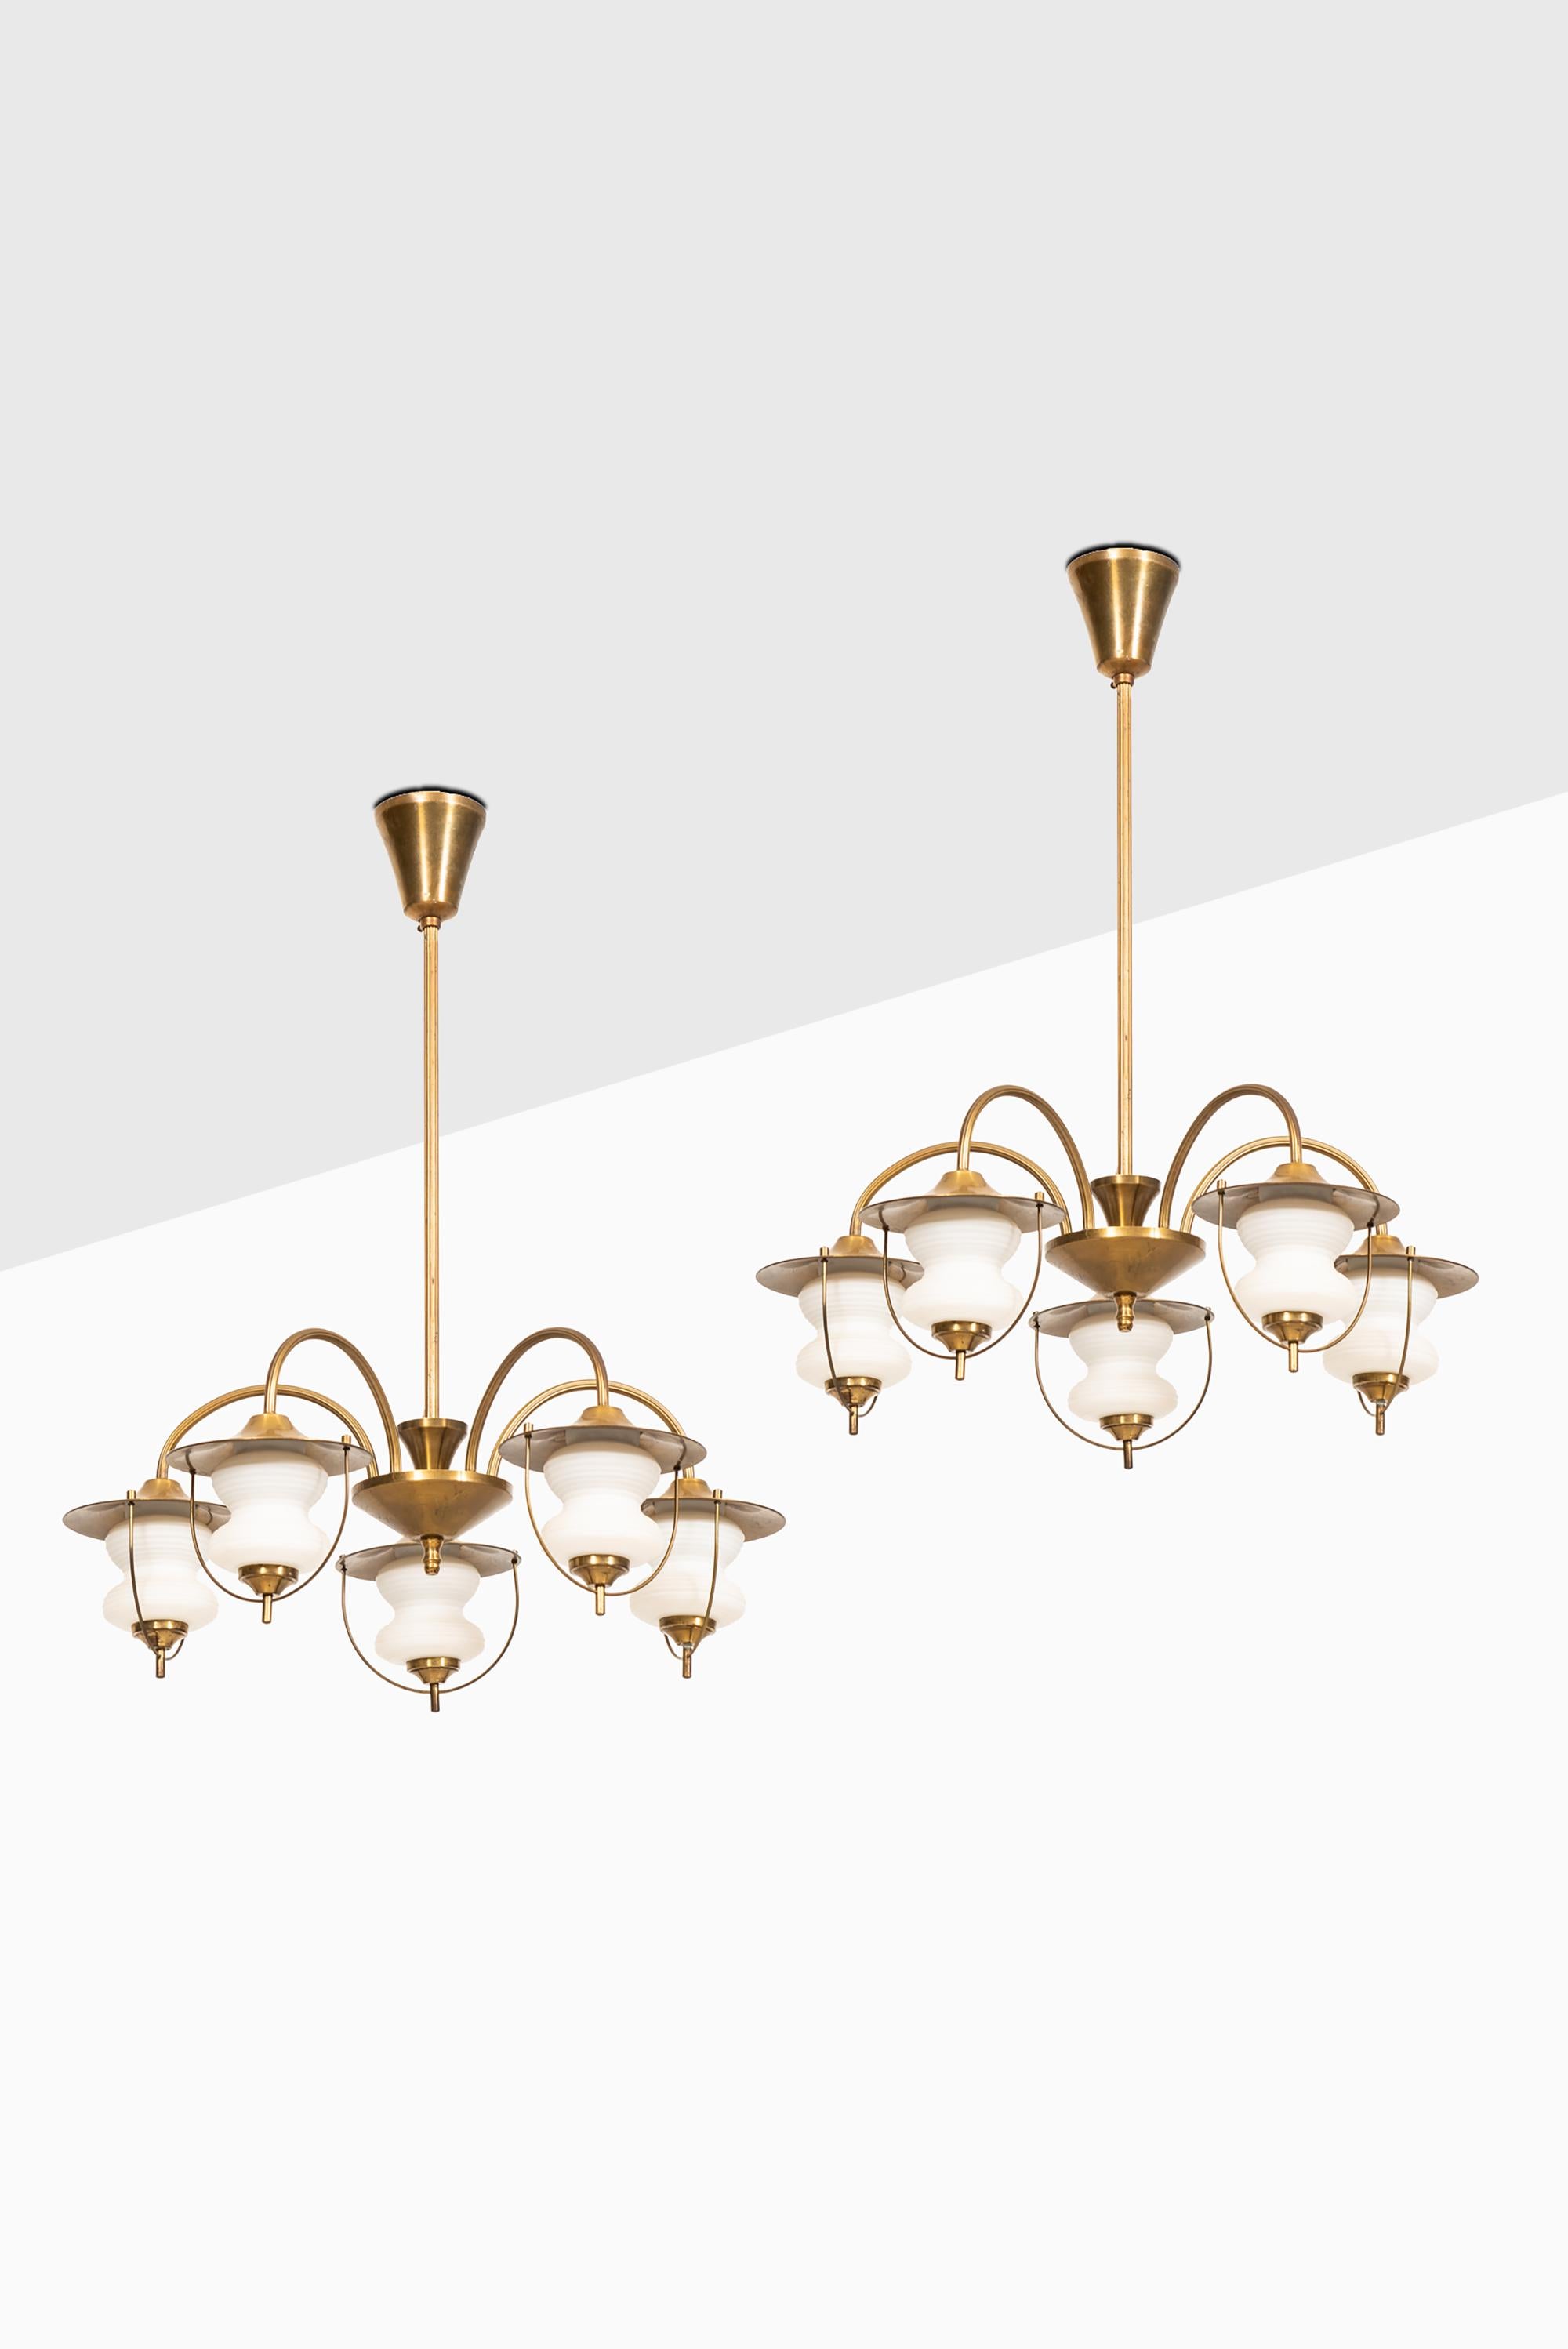 Mid-20th Century Ceiling Lamps Produced in Denmark